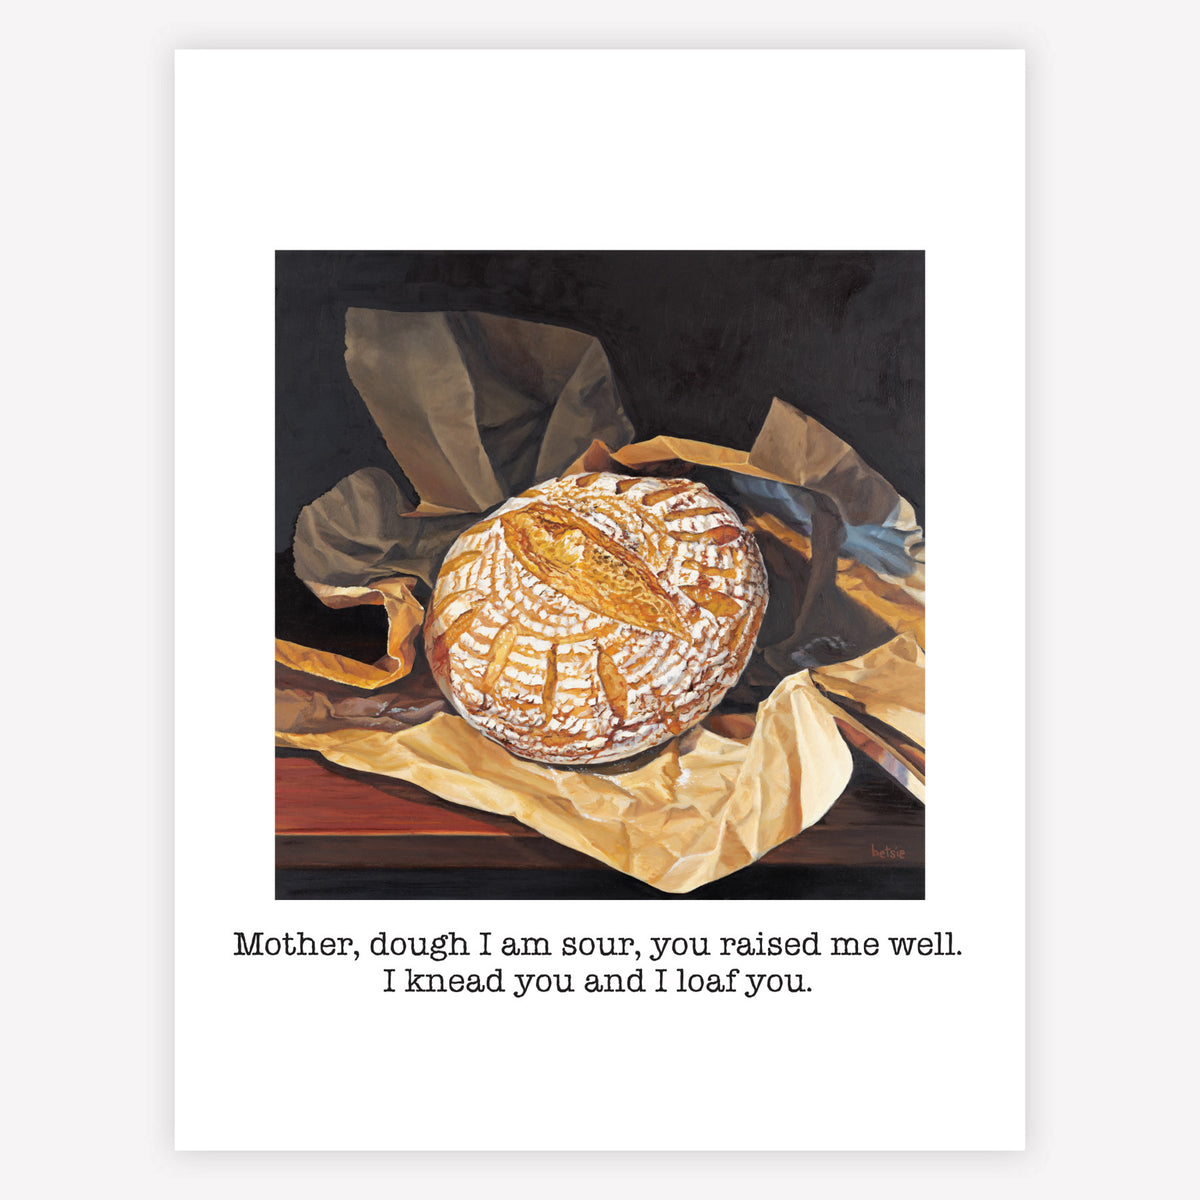 "Mother, dough I am sour" Greeting Card